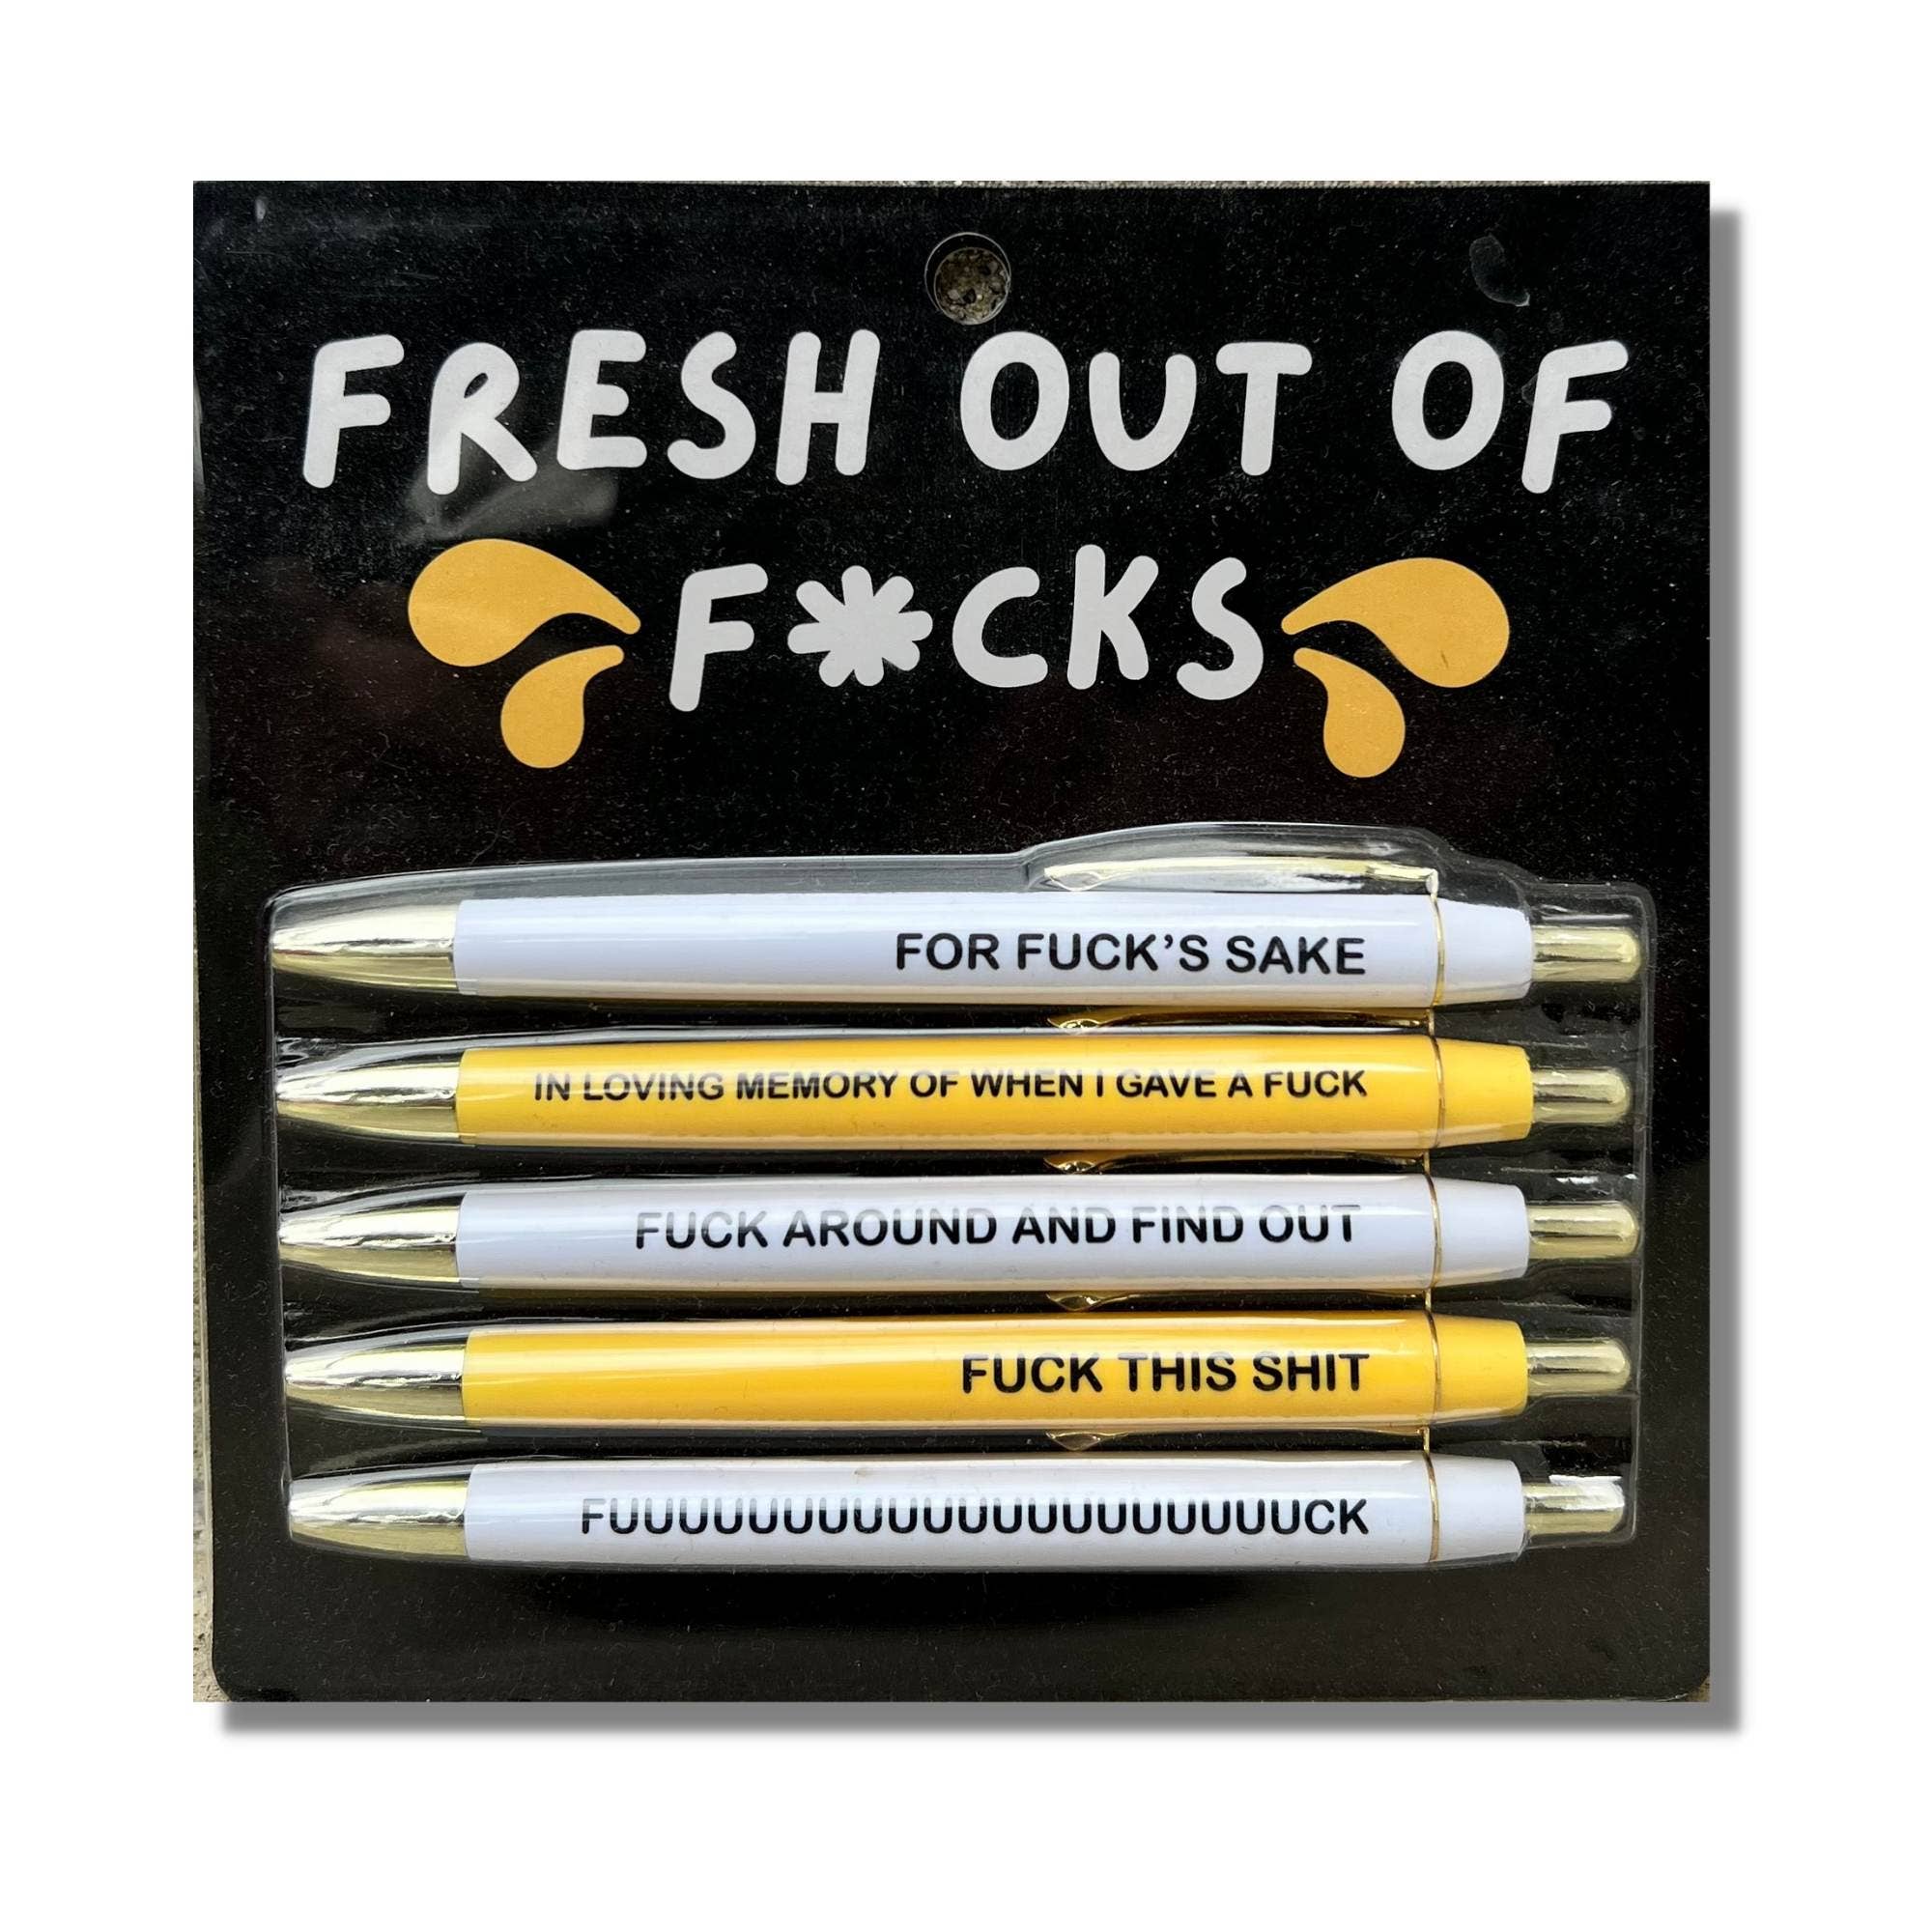  Fresh Outta Fucks Pad and Pen, Fresh Out of Fcks Pen Set,  Black Post It Notes, Snarky Novelty Office Supplies (Mix) : Office Products